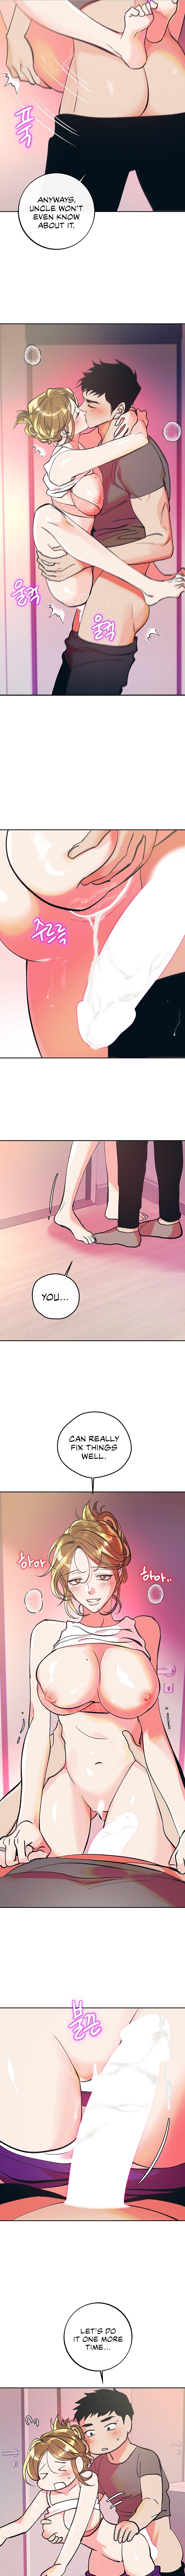 the-memories-of-that-summer-day-chap-32-5